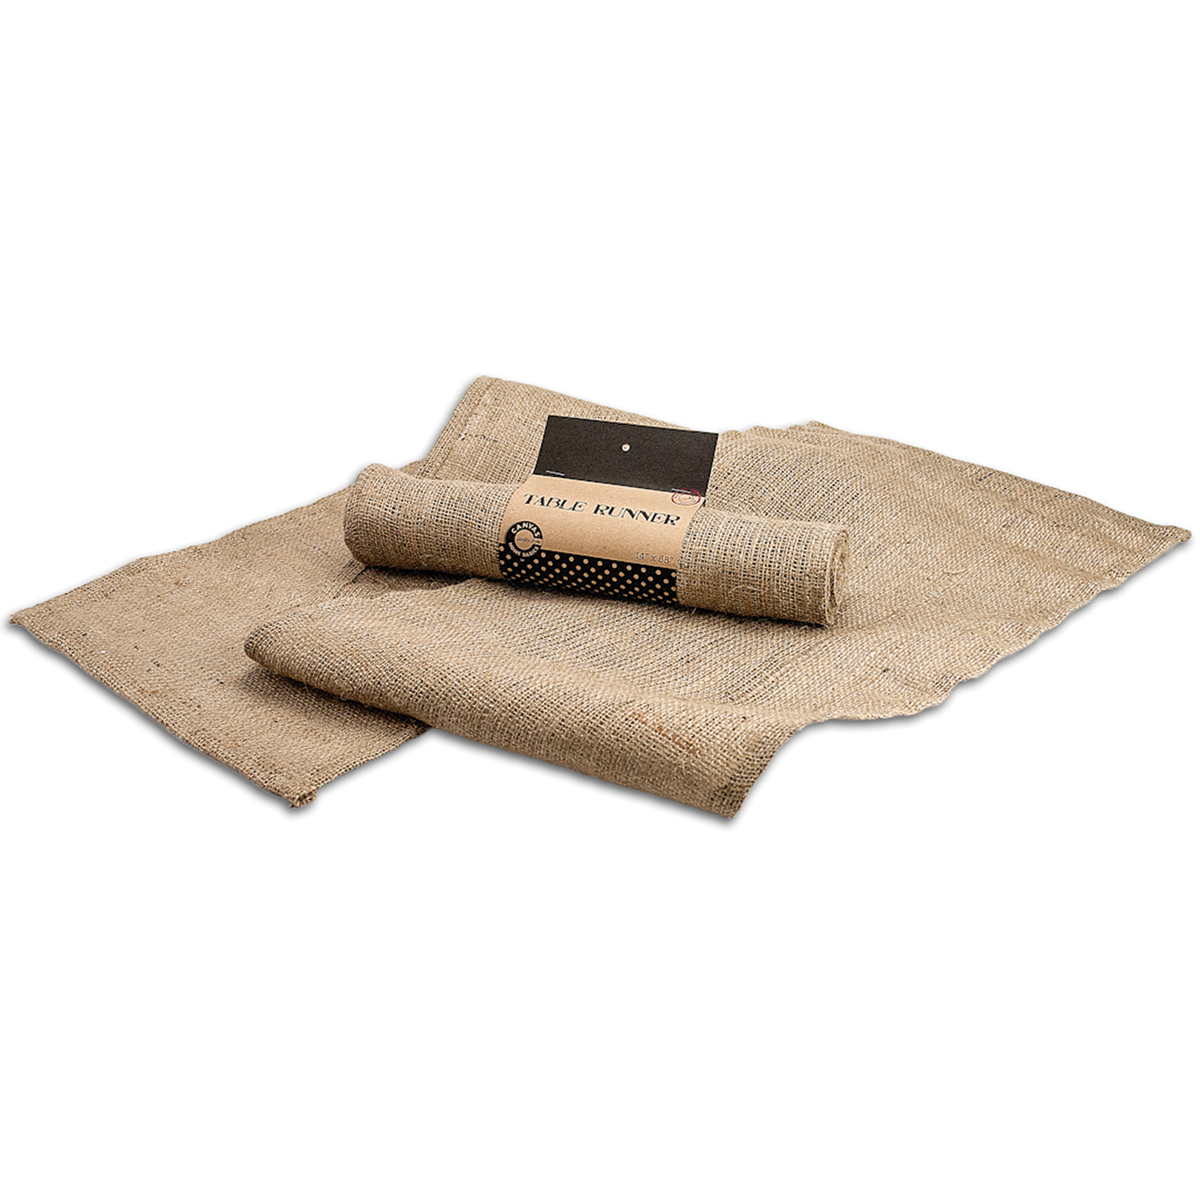 Burlap Table Runner 14"X58"-Natural, Pk 3, Canvas Corp - image 2 of 2